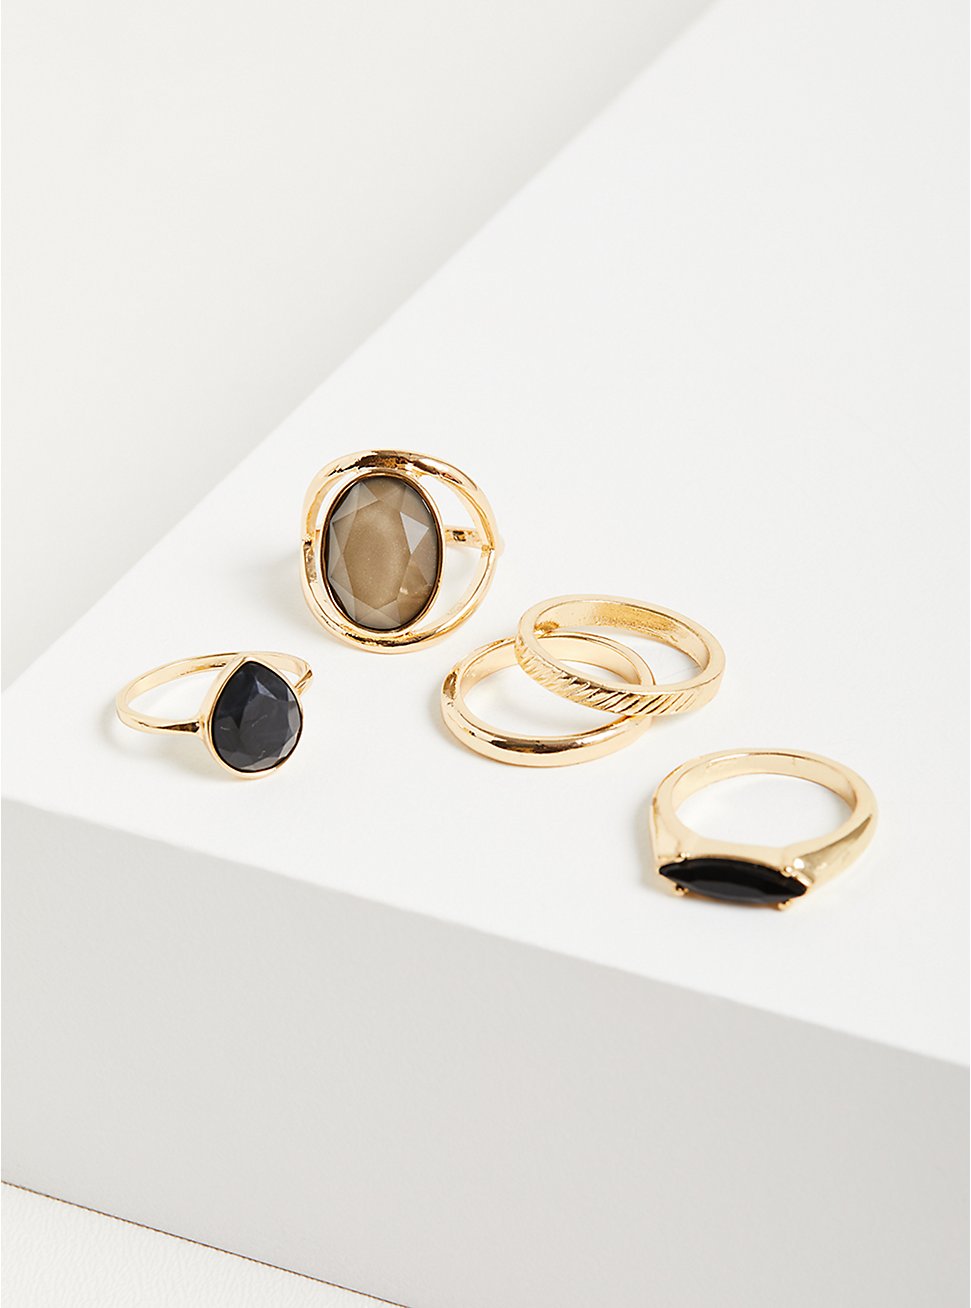 Plus Size Cocktail Ring Set of 4 - Gold Tone & Grey Stone, GOLD, hi-res